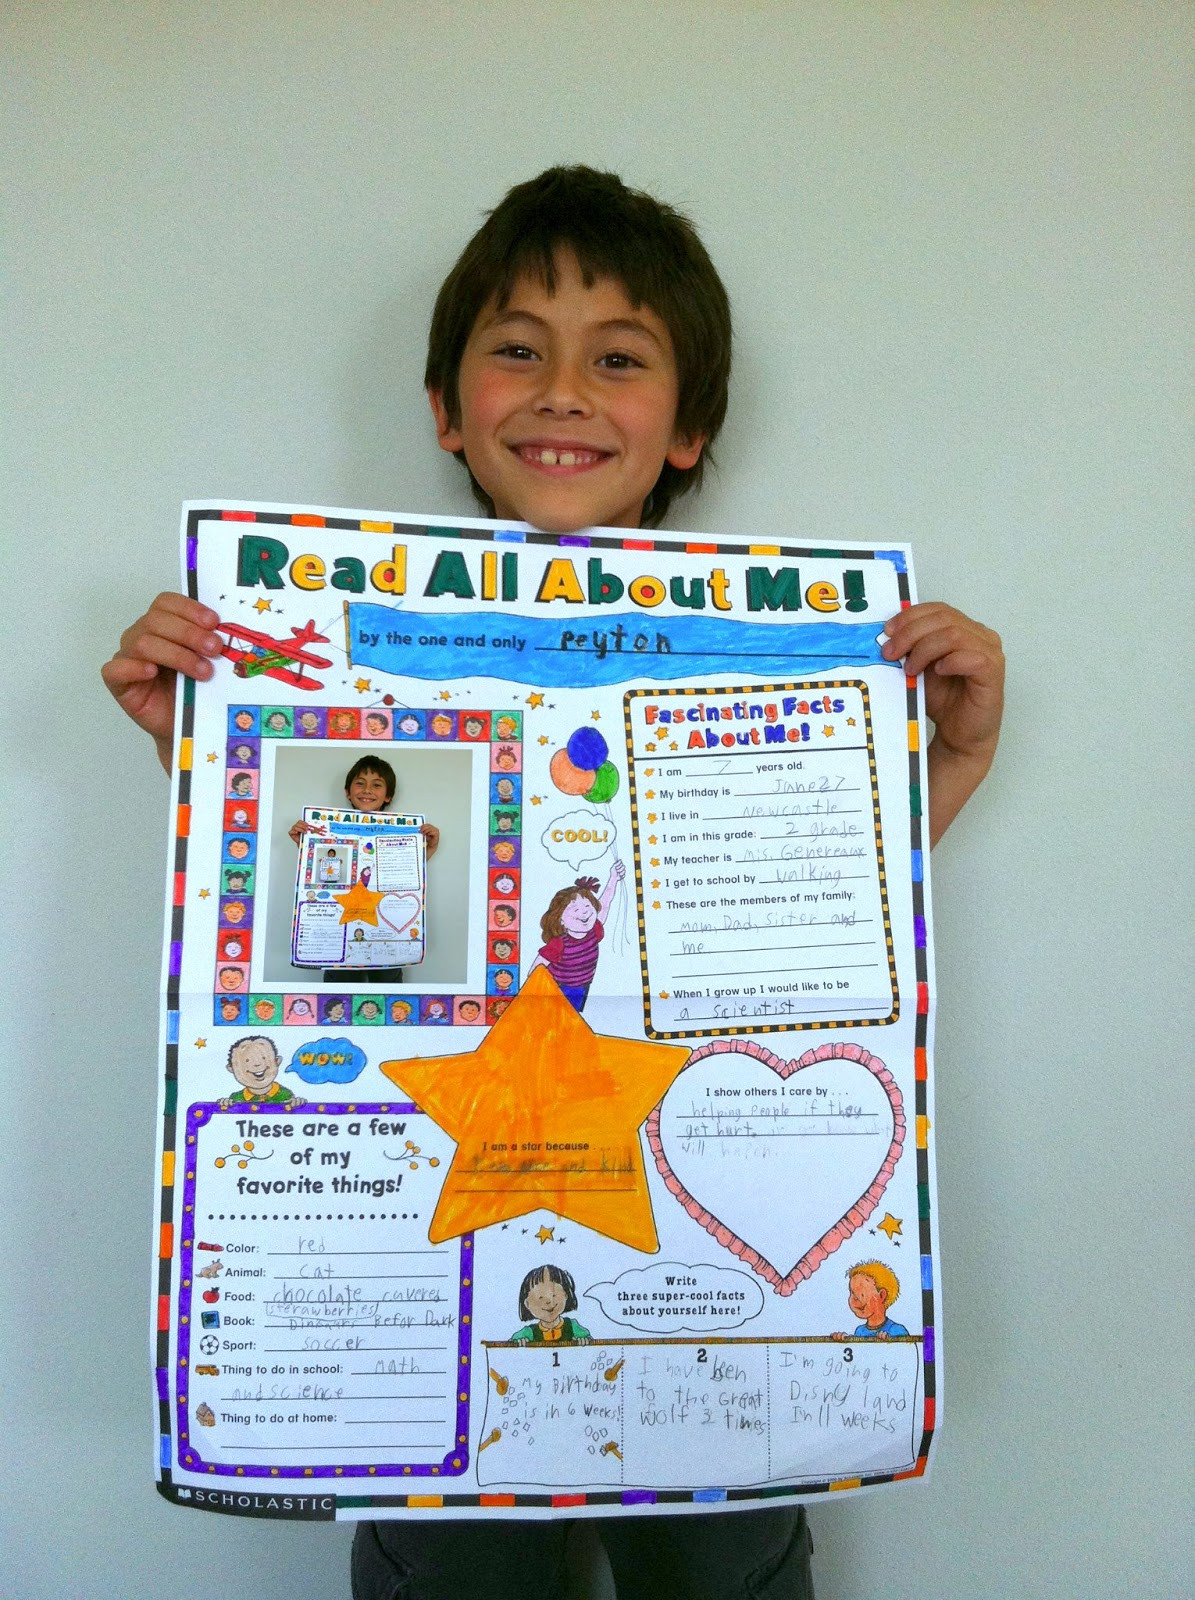 School Project Ideas For Kids
 The Contemplative Creative "About Me" Poster